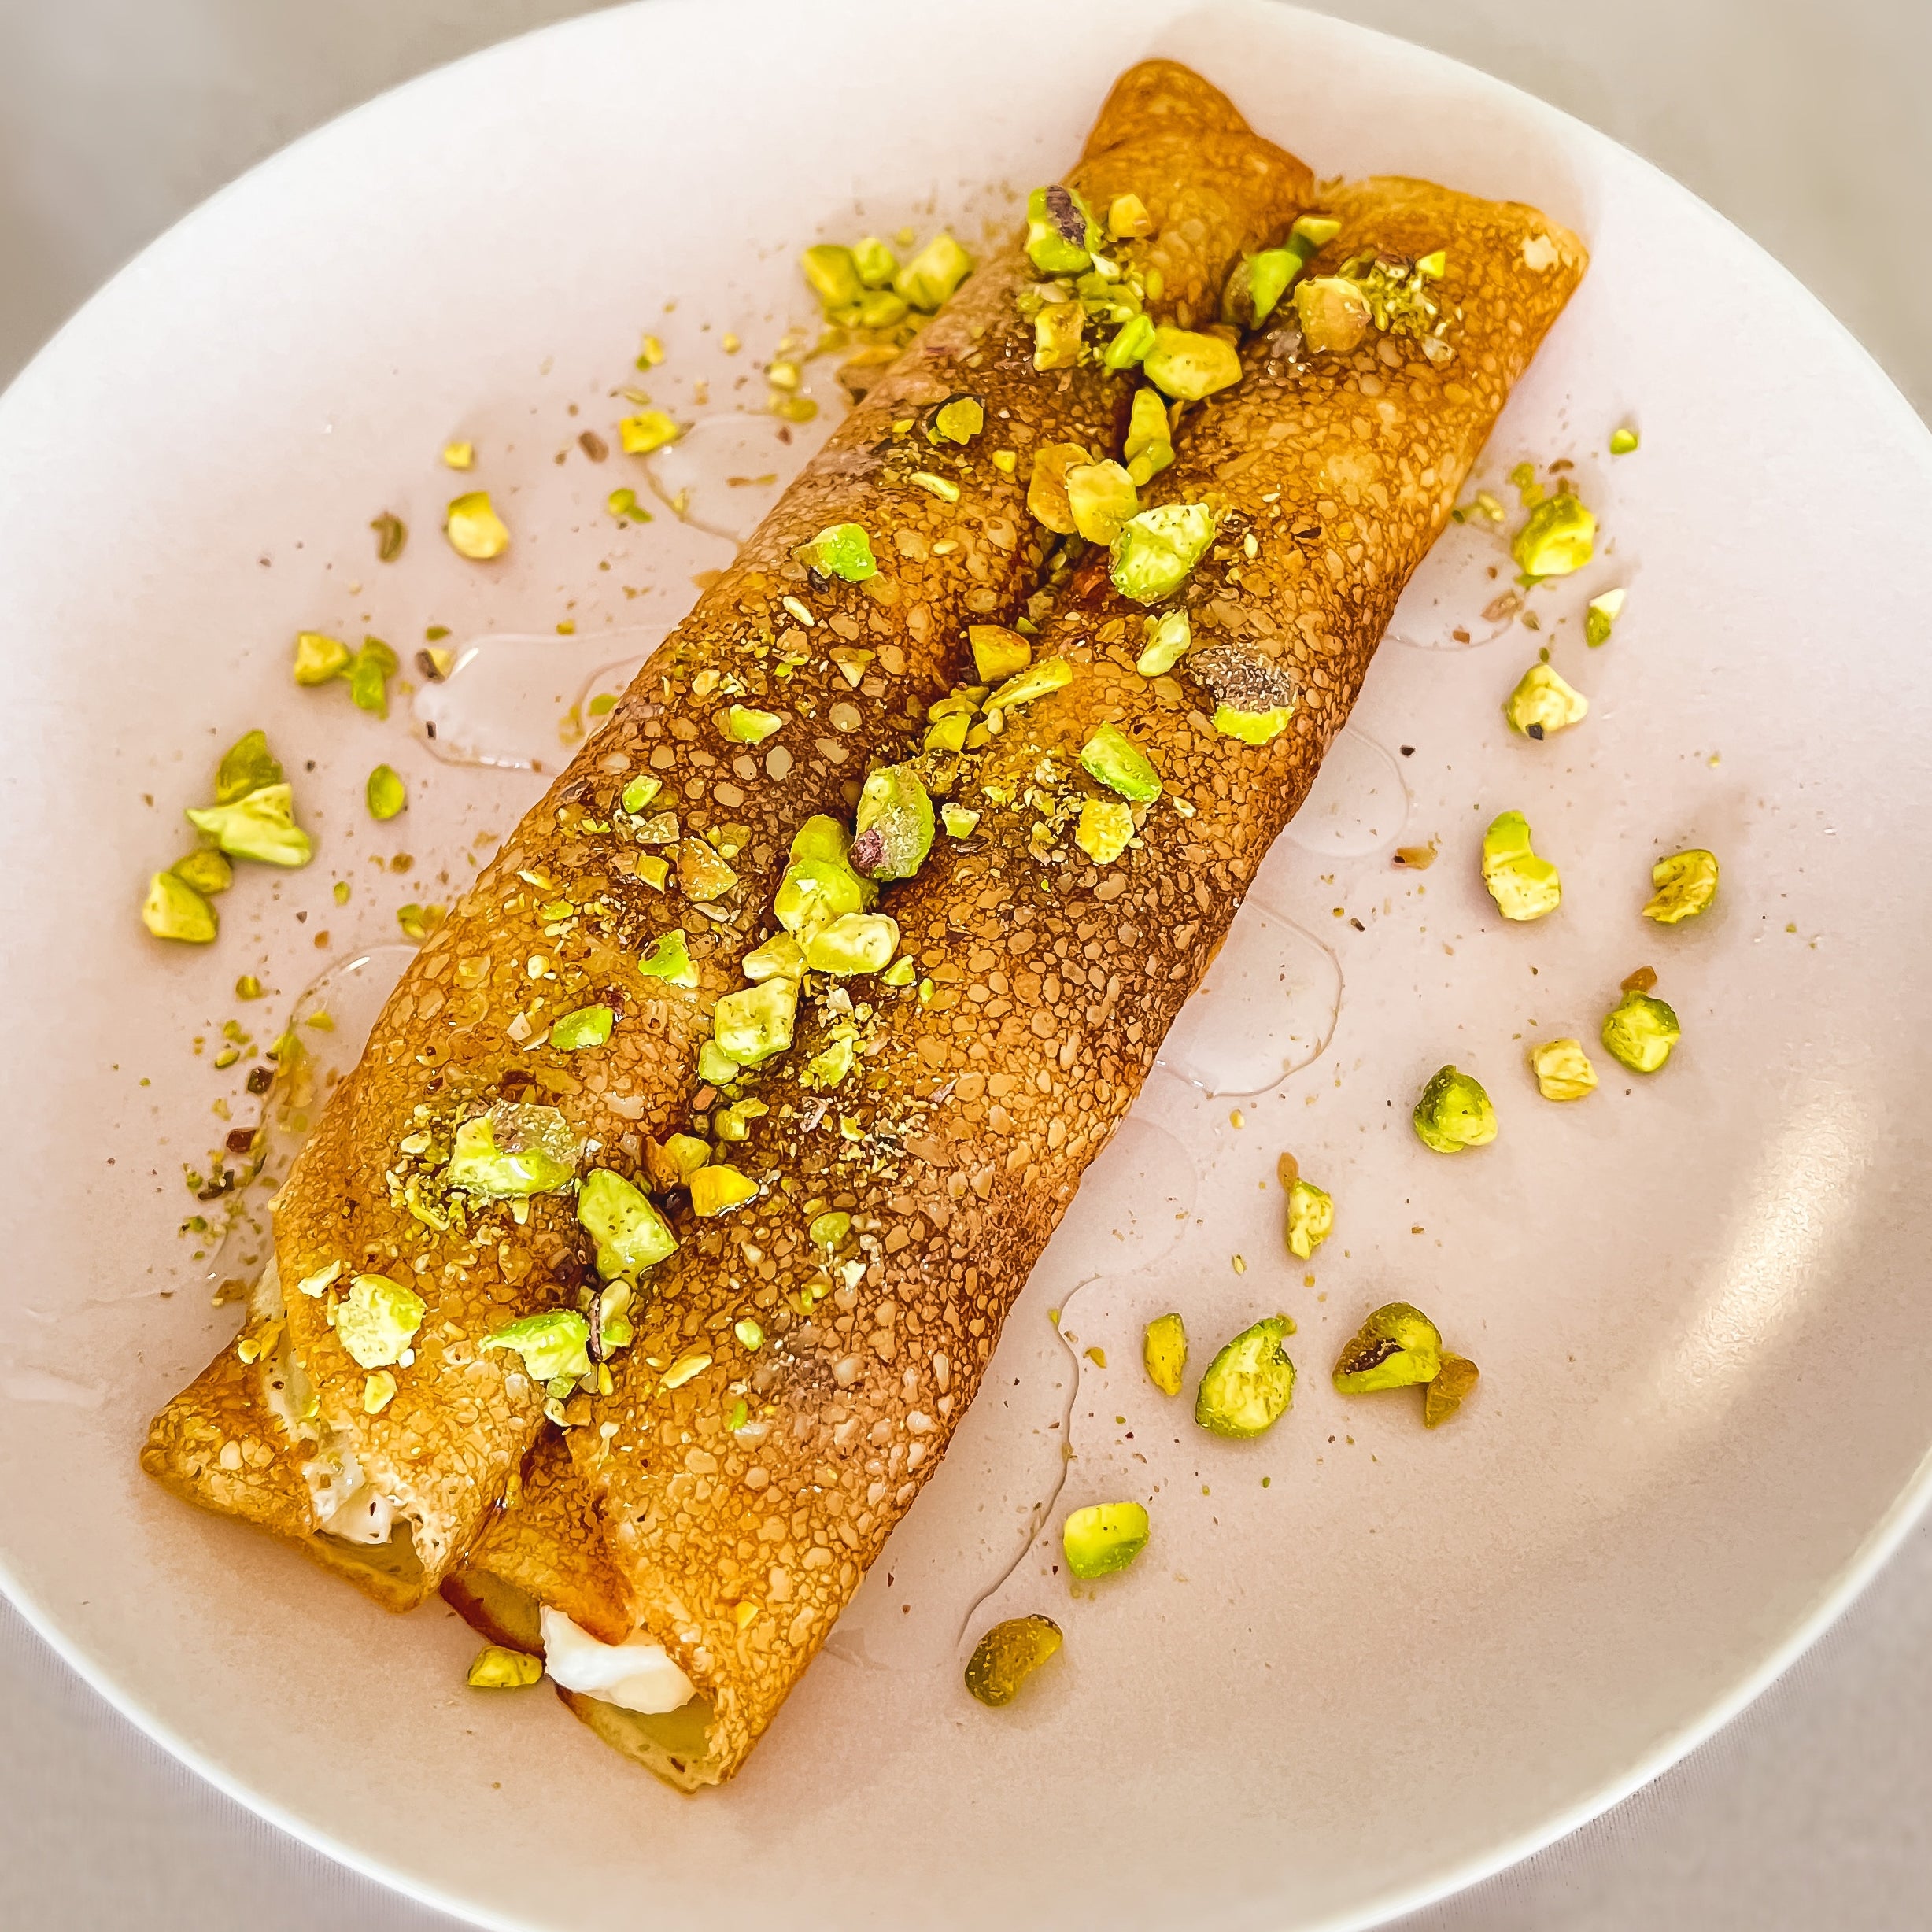 Nana's Creperie exclusive dessert crepe - Baklava Crepe with crushed Pistachio, Orange Blossom Syrup & Baklava traditional thickened cream.